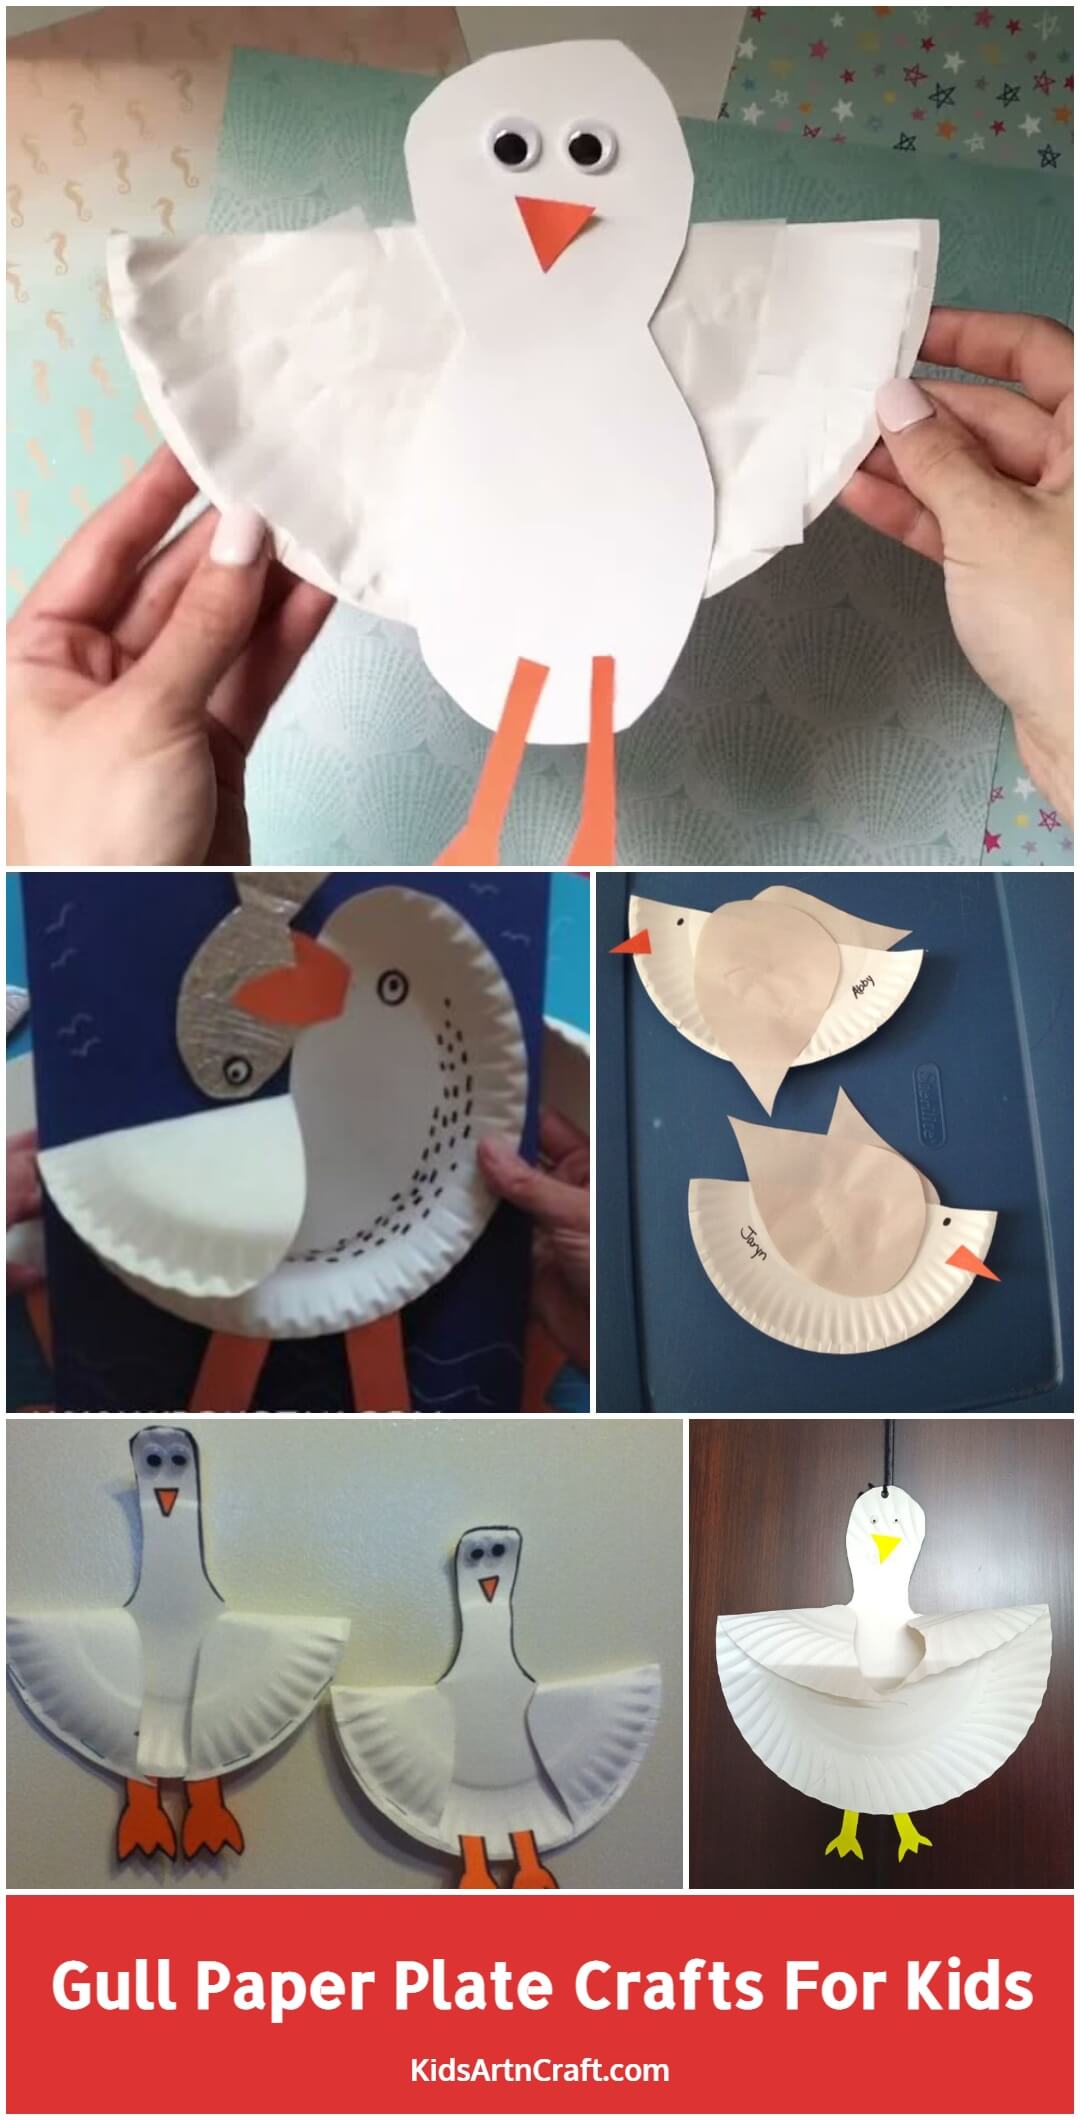 Gull Paper Plate Crafts For Kids